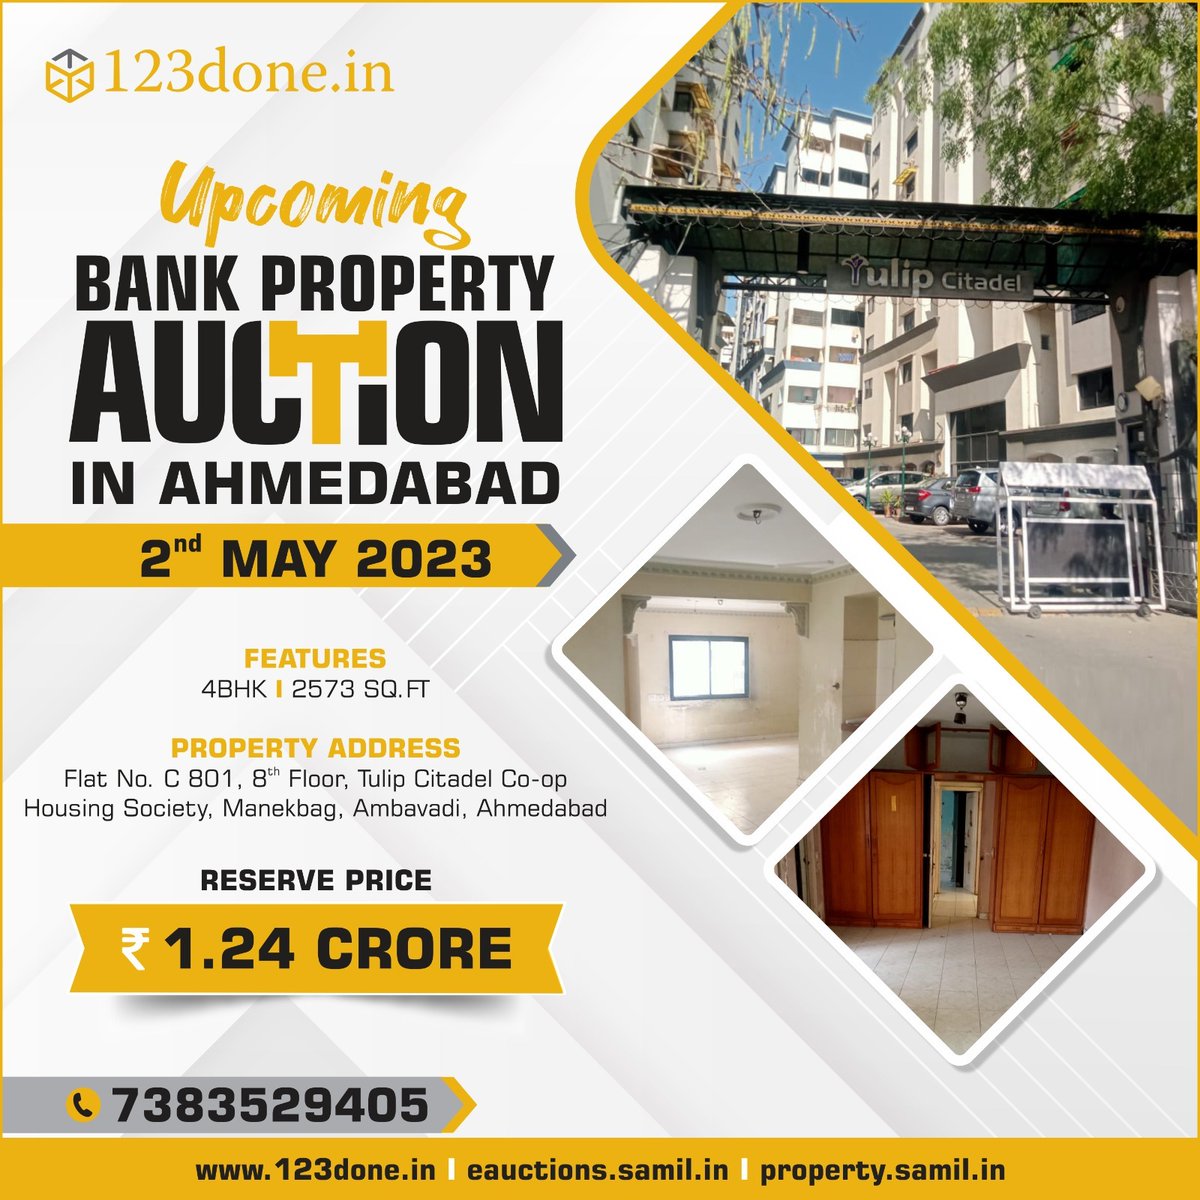 Check out the Upcoming Bank Property Auction in Ahmedabad on 2nd May 2023.
For more details, contact us now.

Enquire Now: bit.ly/3KvRqW5

#PropertyAuctions #RealEstate #Pune #123done #PhysicalAuction #Samil #ShriramAutomall #ProudSamilian